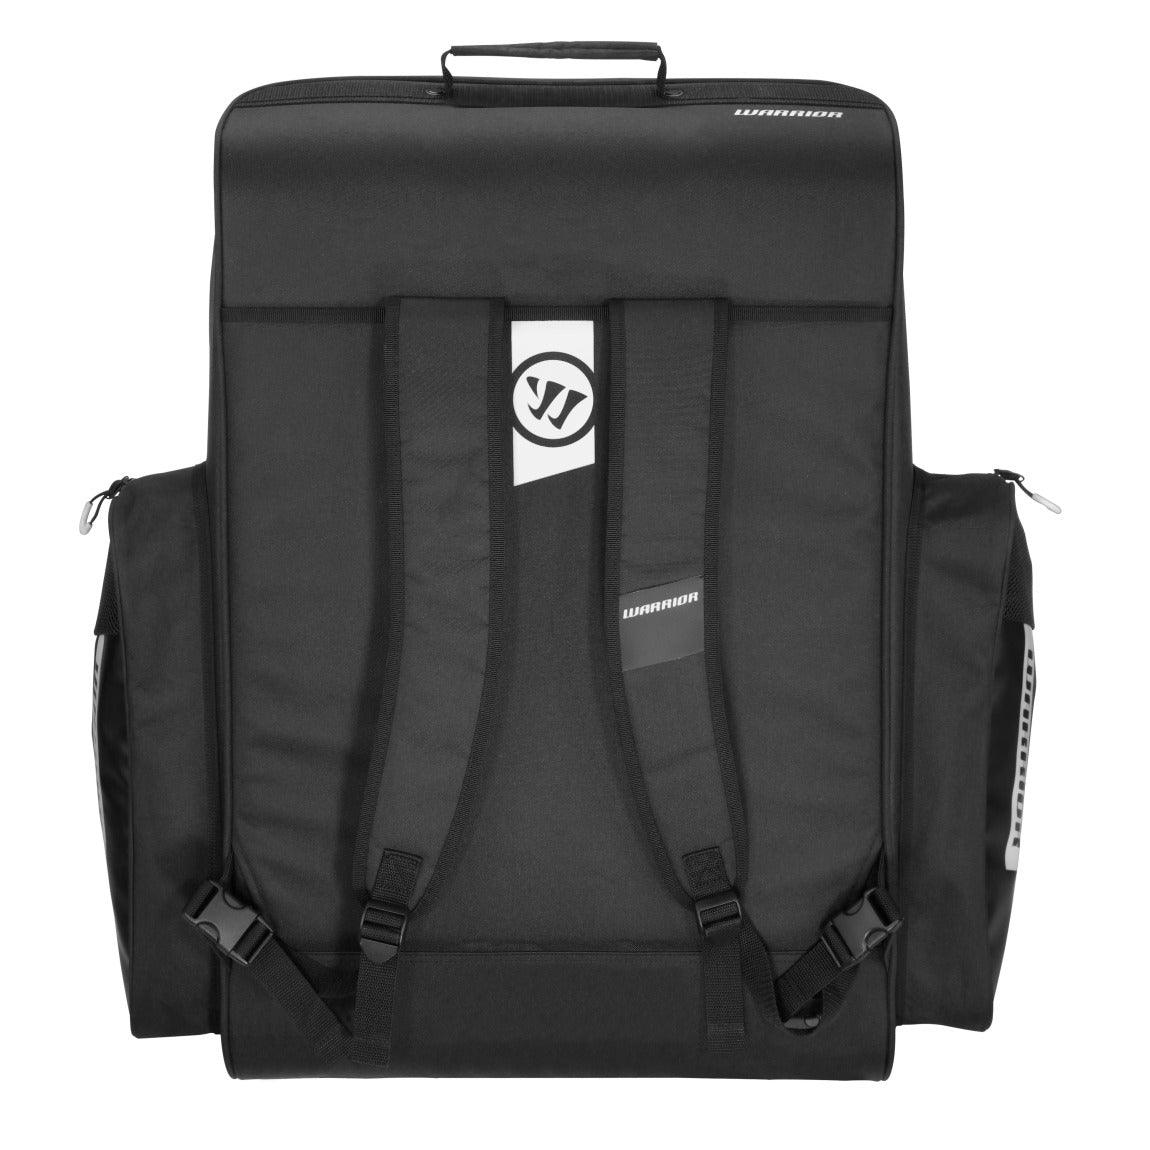 Pro Carry Backpack - Sports Excellence